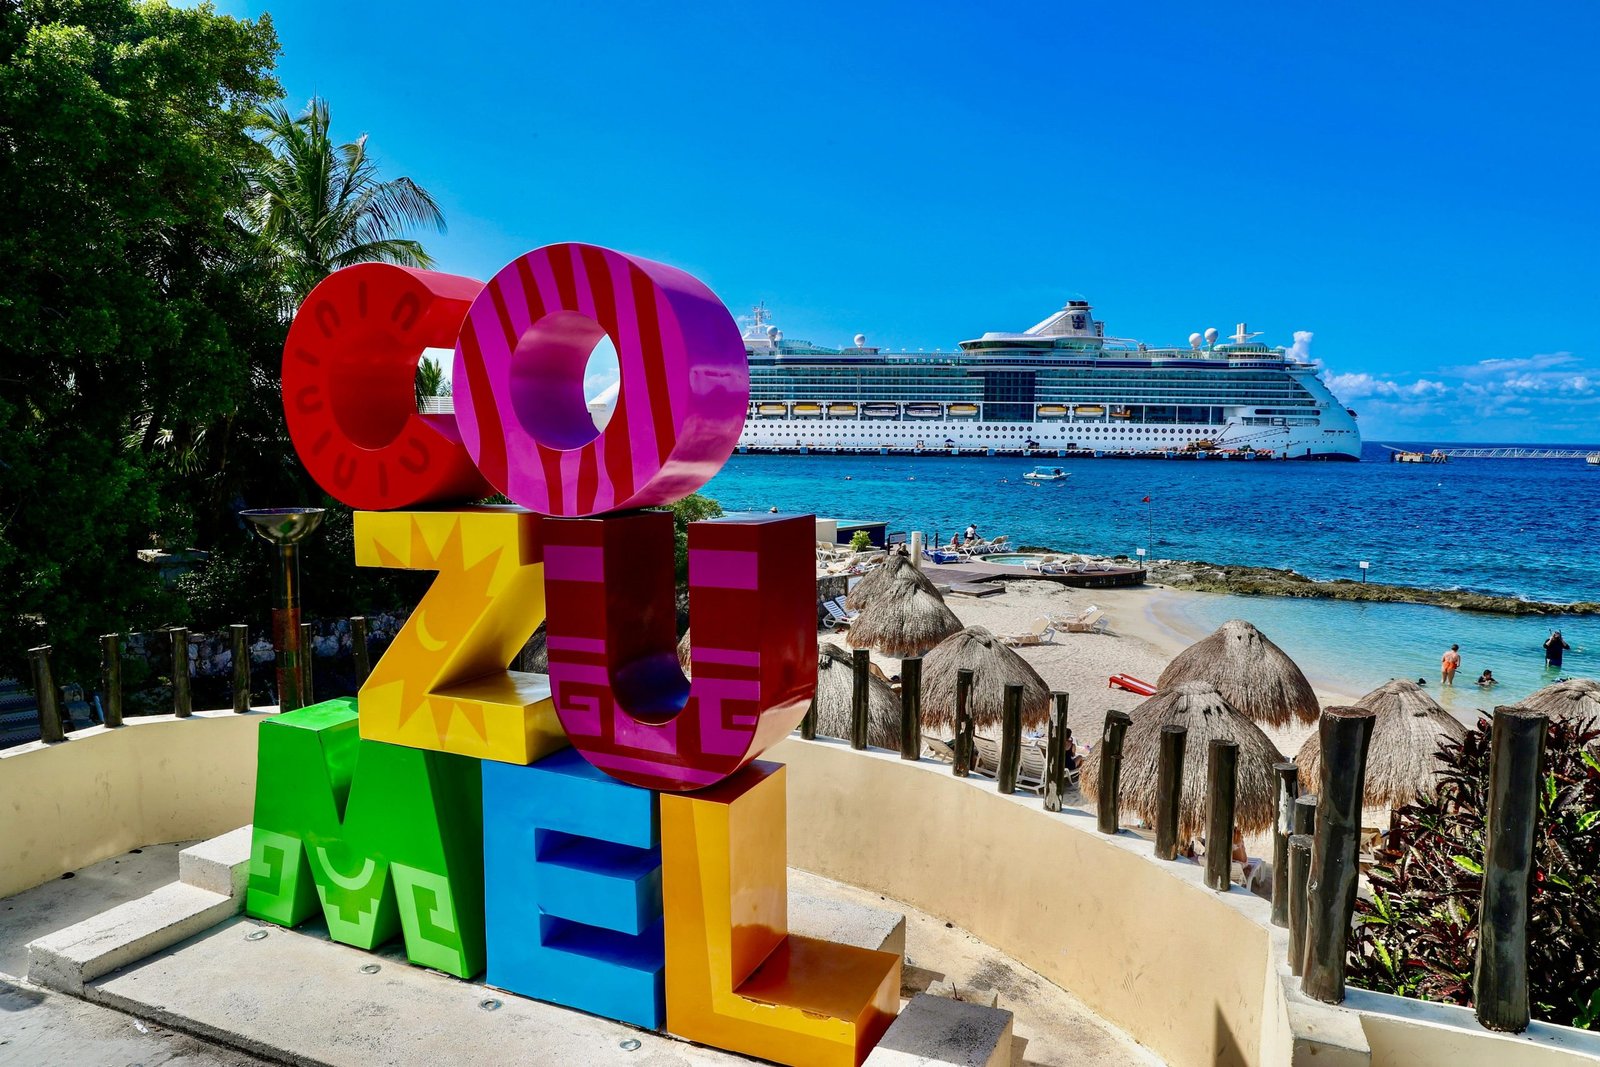 Colorful "COZUMEL" sign in the foreground with a cruise ship and beach-goers in the background on a sunny day